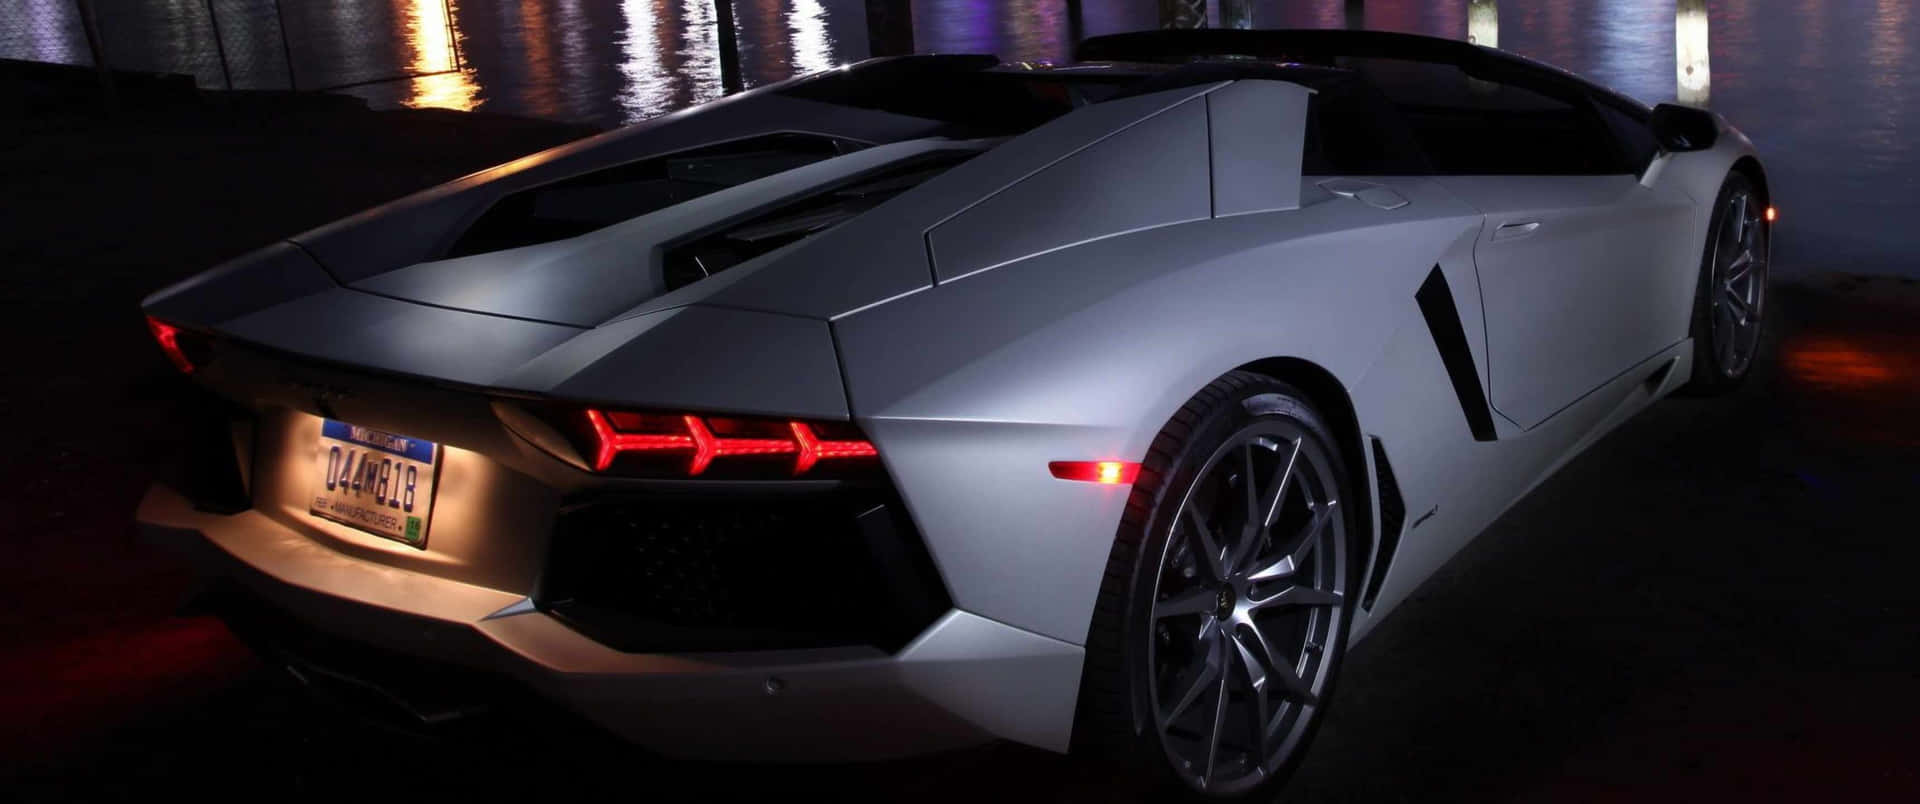 "Feast your eyes on this 3440x1440p Lamborghini!"